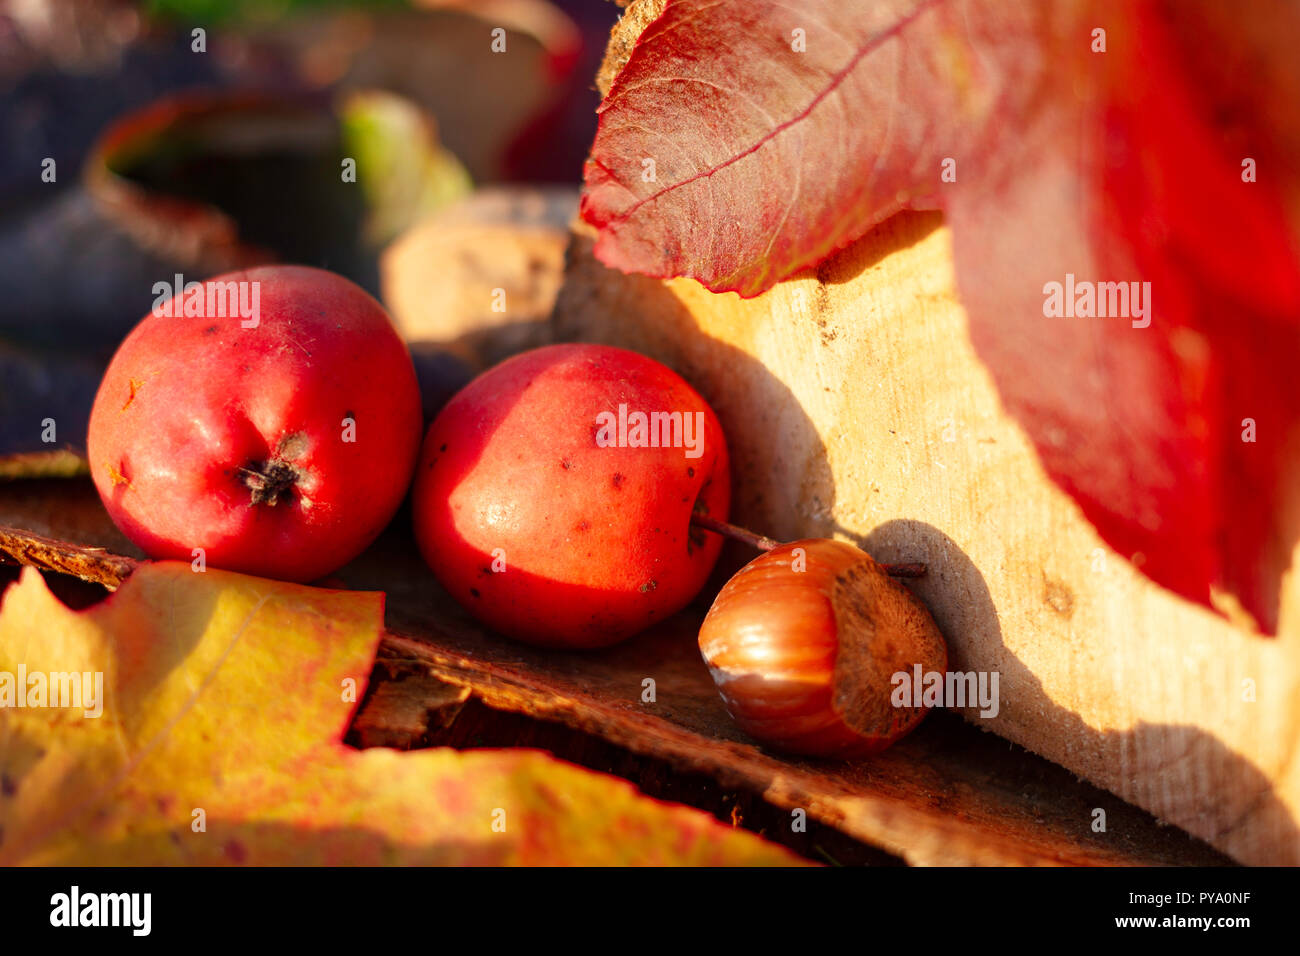 Autumnal still life image of two crab apples and hazelnut with yellow and red maple leaves against a wooden log. Stock Photo